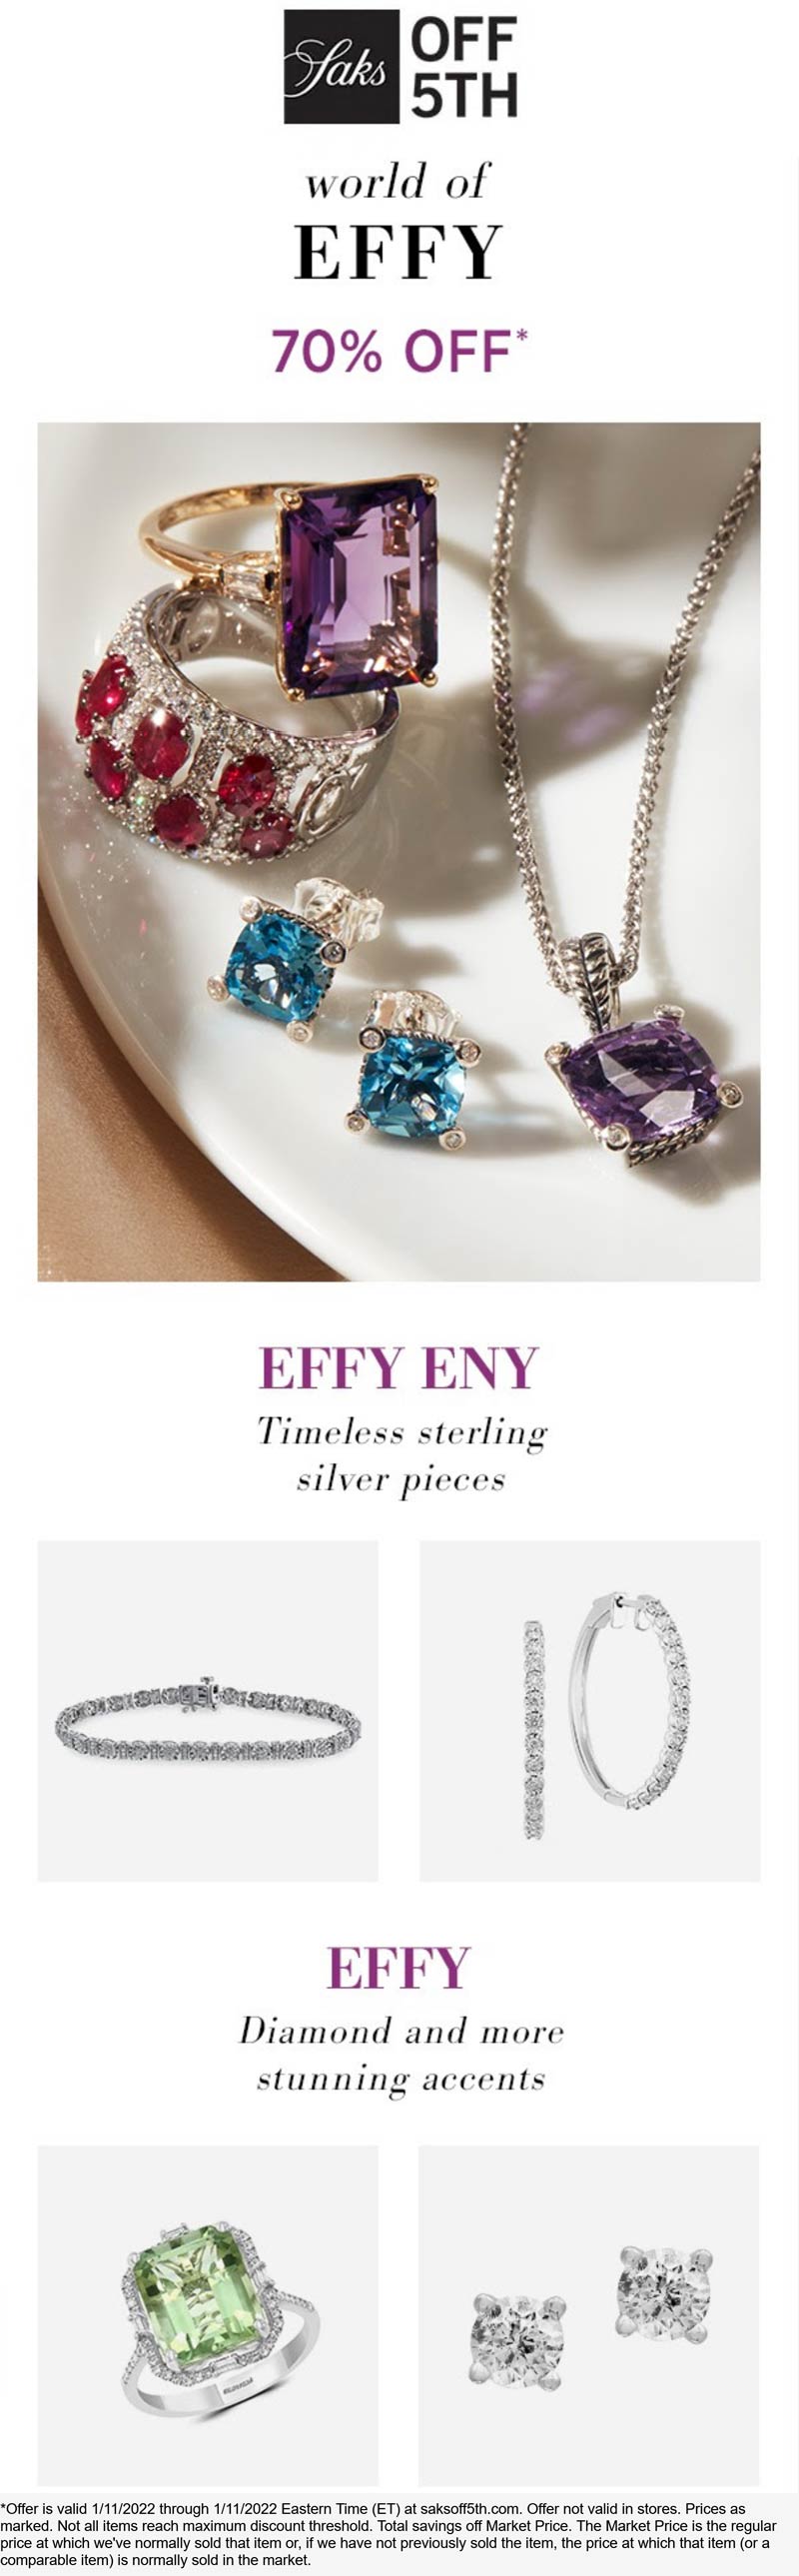 OFF 5TH stores Coupon  70% off Effy jewelry online today at Saks OFF 5TH #off5th 